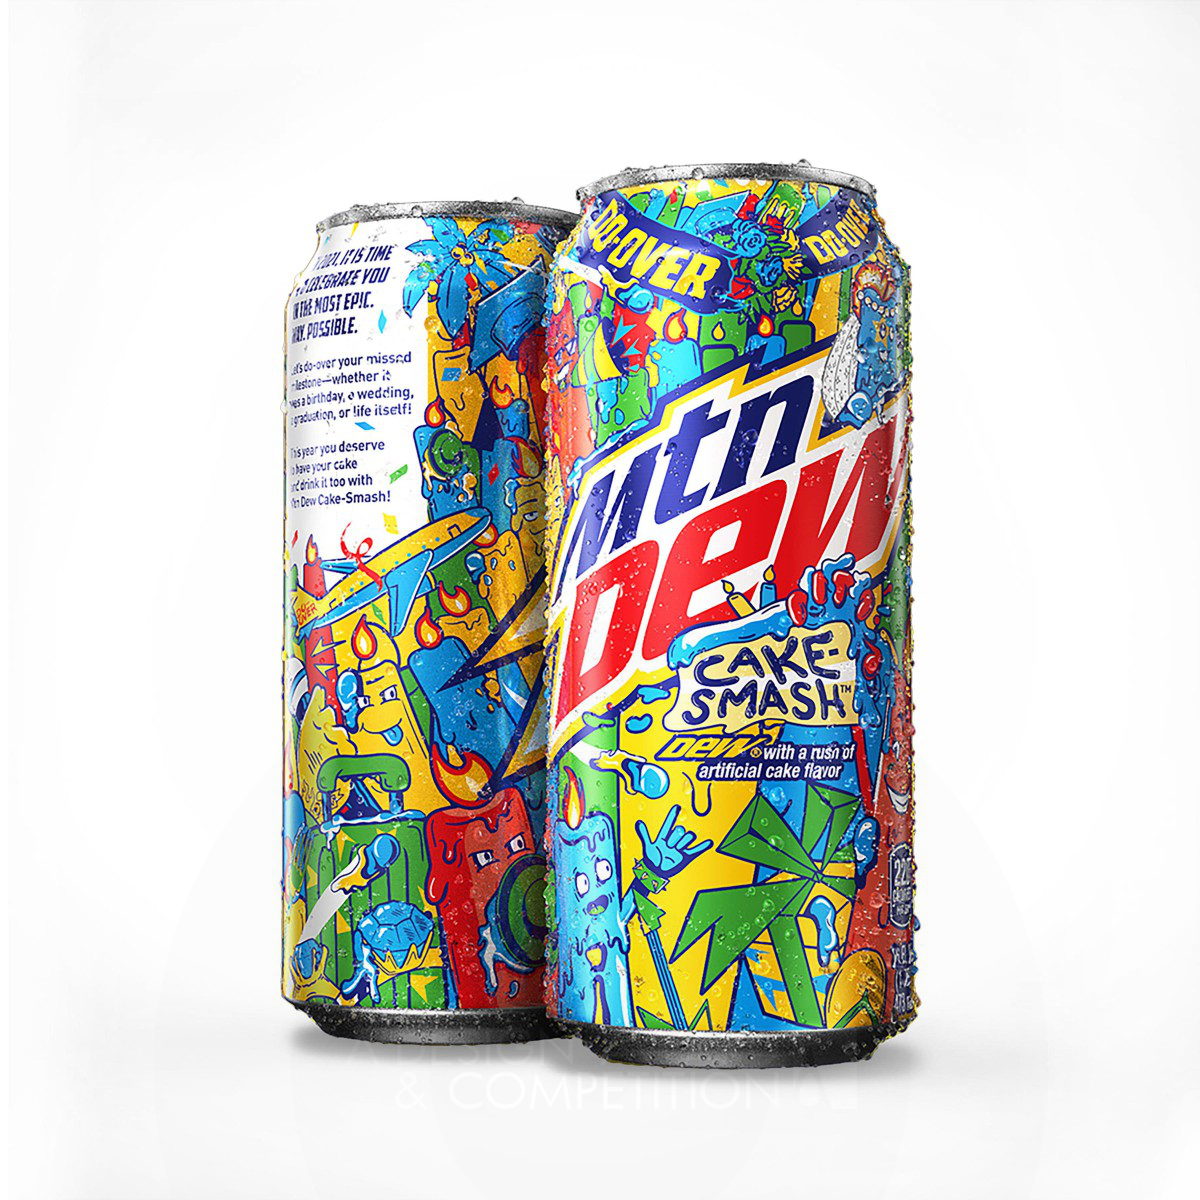 PepsiCo Design and Innovation wins Golden at the prestigious A' Packaging Design Award with MTN Dew Cake-Smash Beverage Packaging.